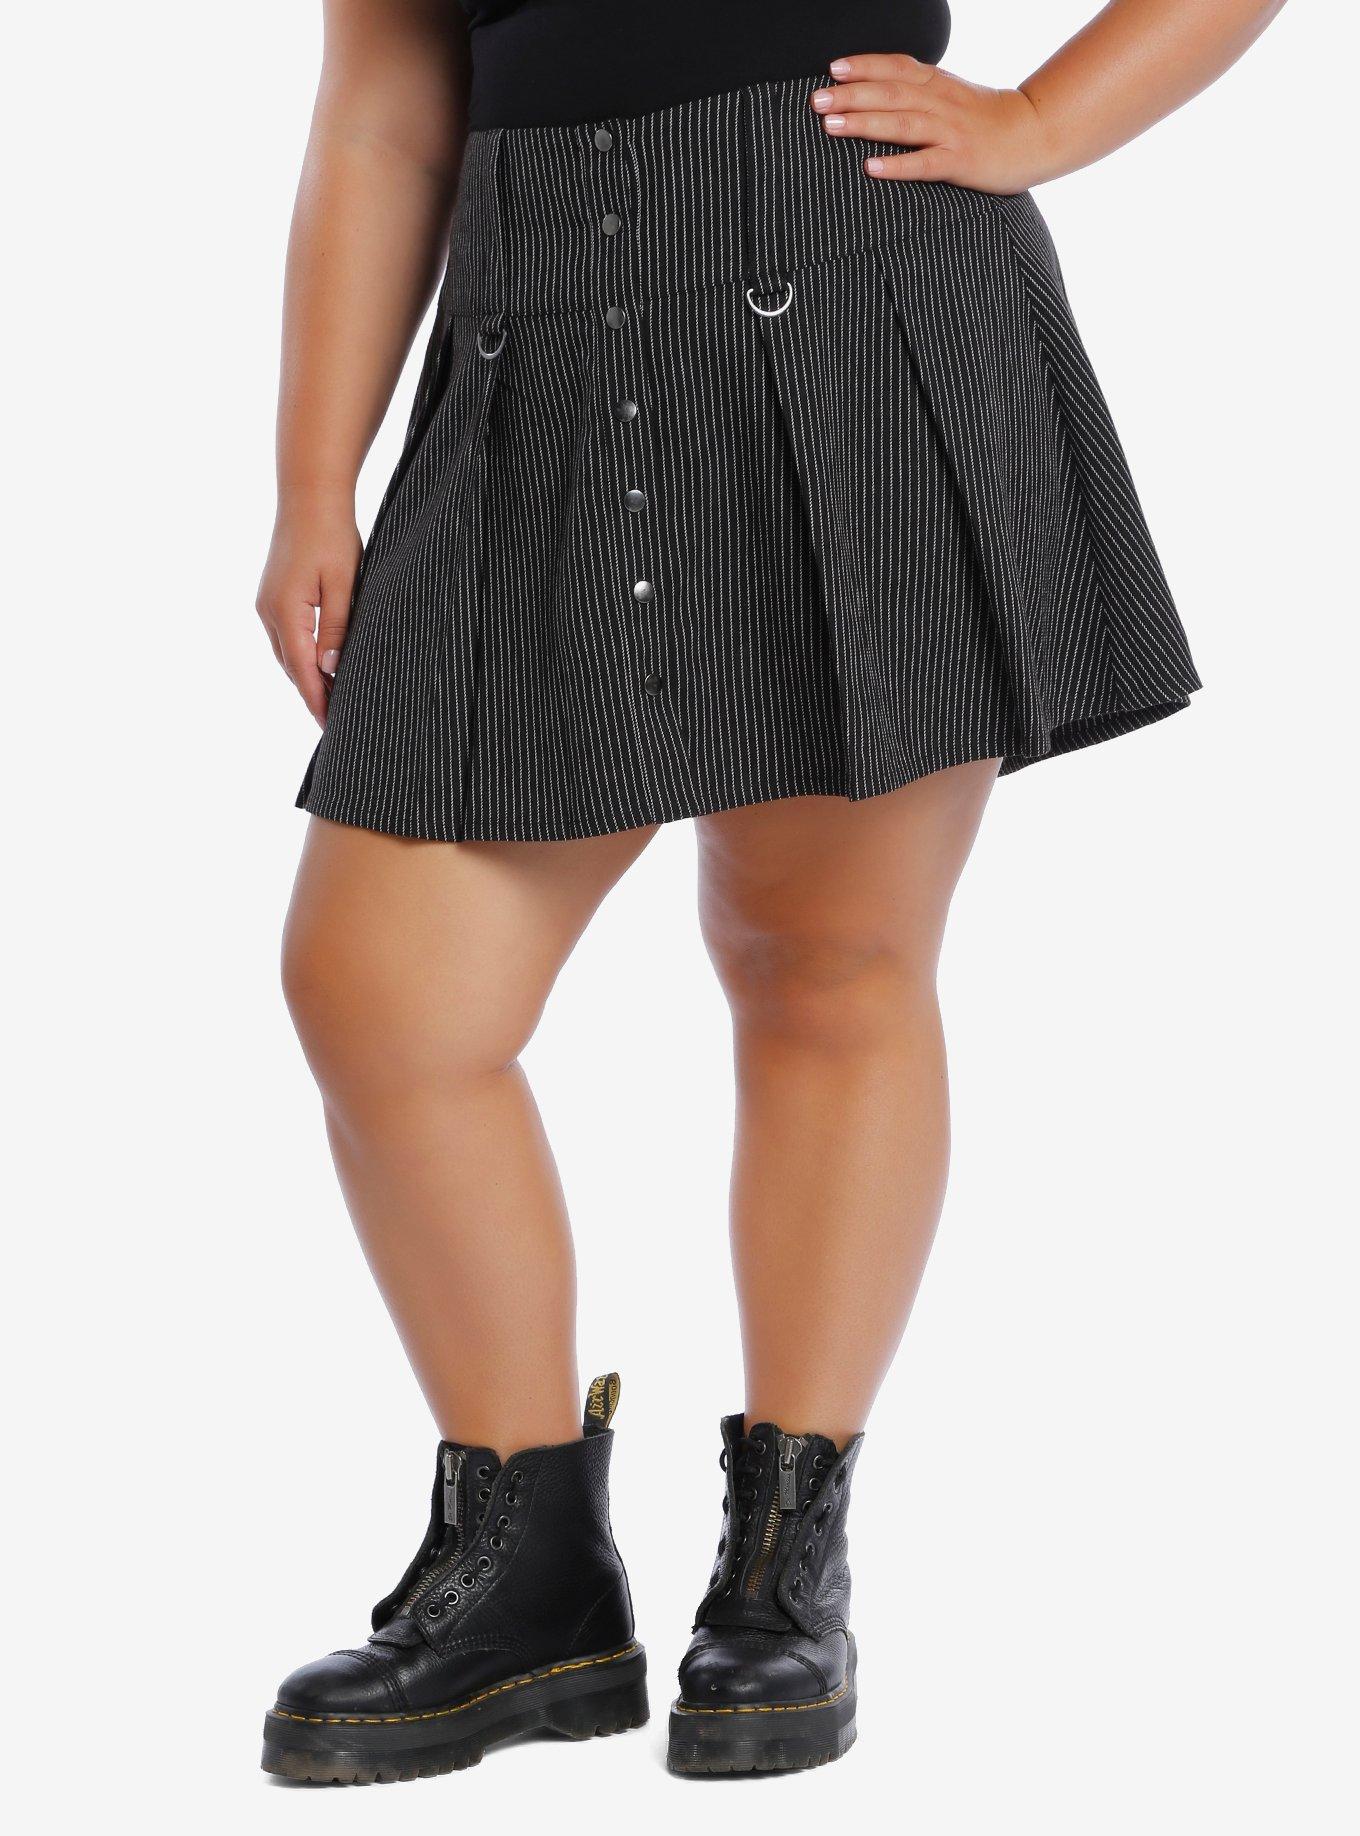 Pinstripe D-Ring Pleated Skirt Plus Size, PINSTRIPE, hi-res